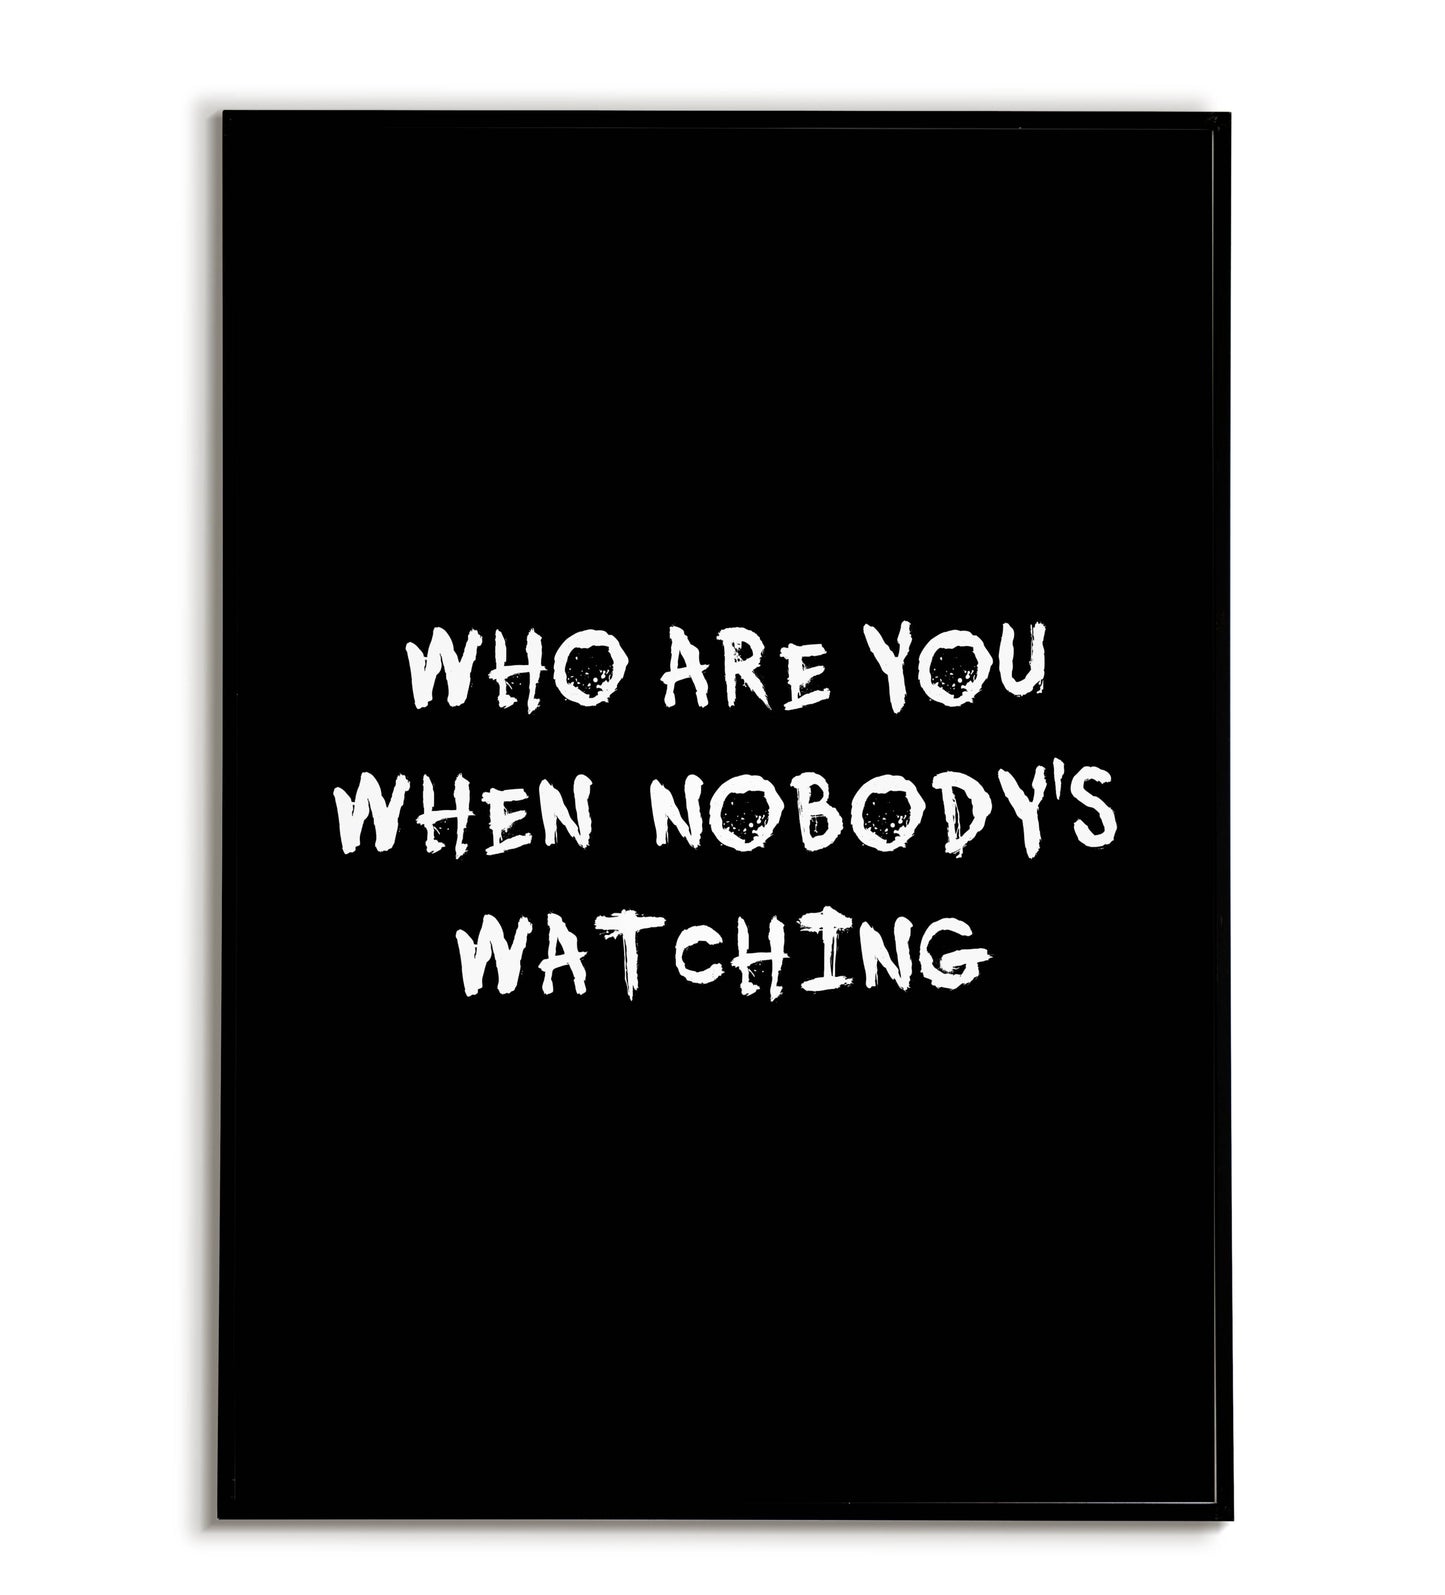 Who are you when nobody's watching" typographic self-reflection poster